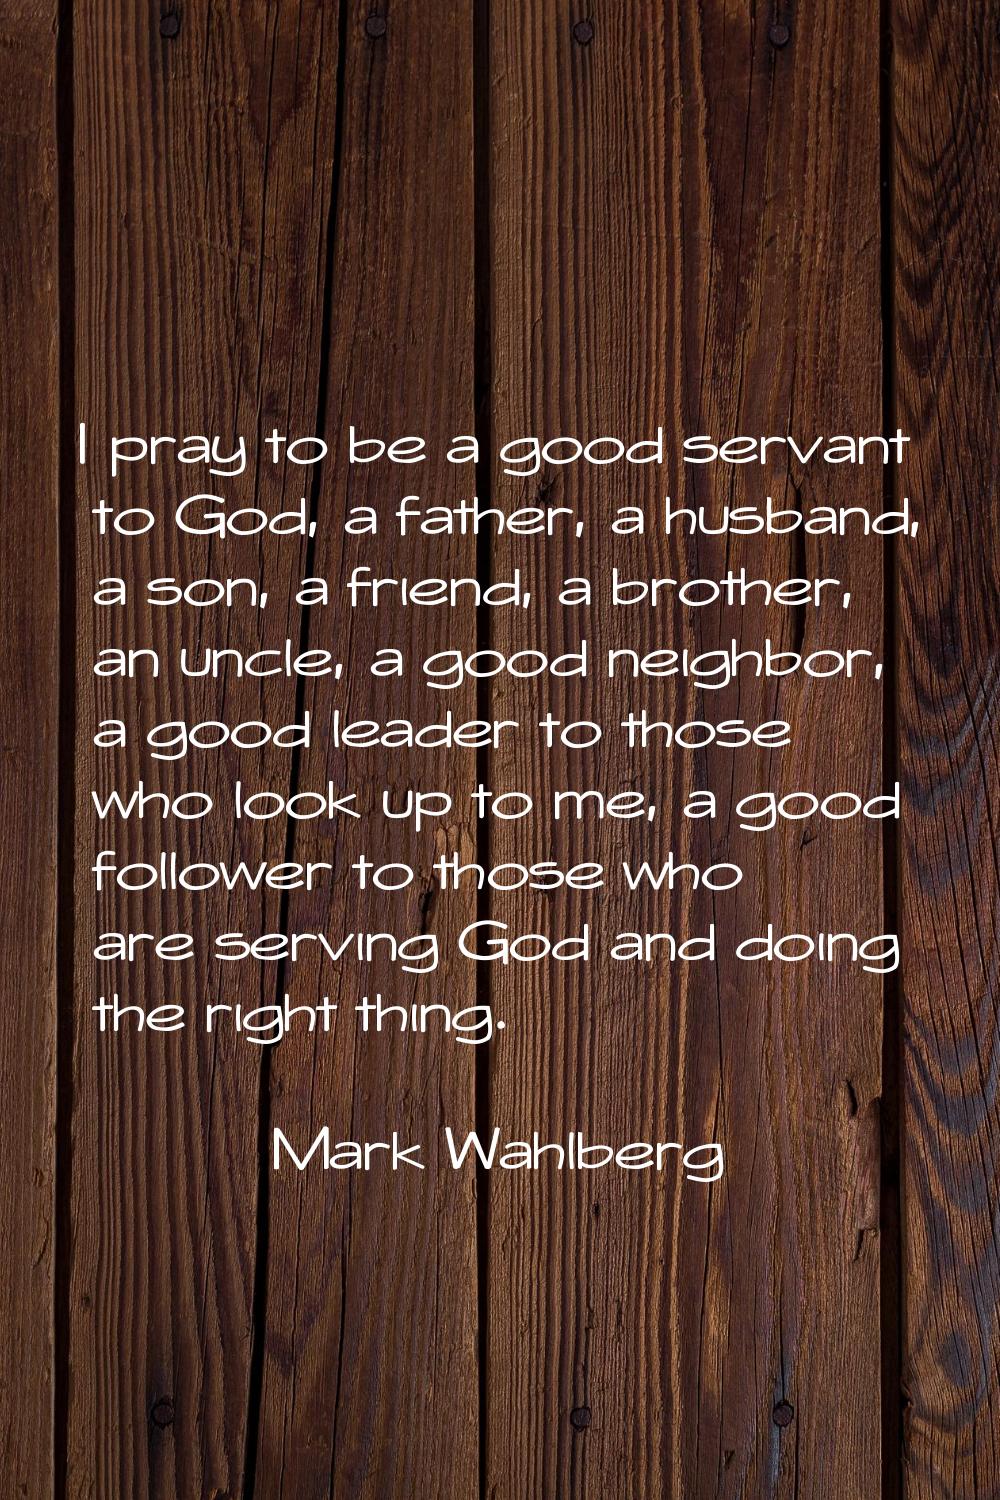 I pray to be a good servant to God, a father, a husband, a son, a friend, a brother, an uncle, a go